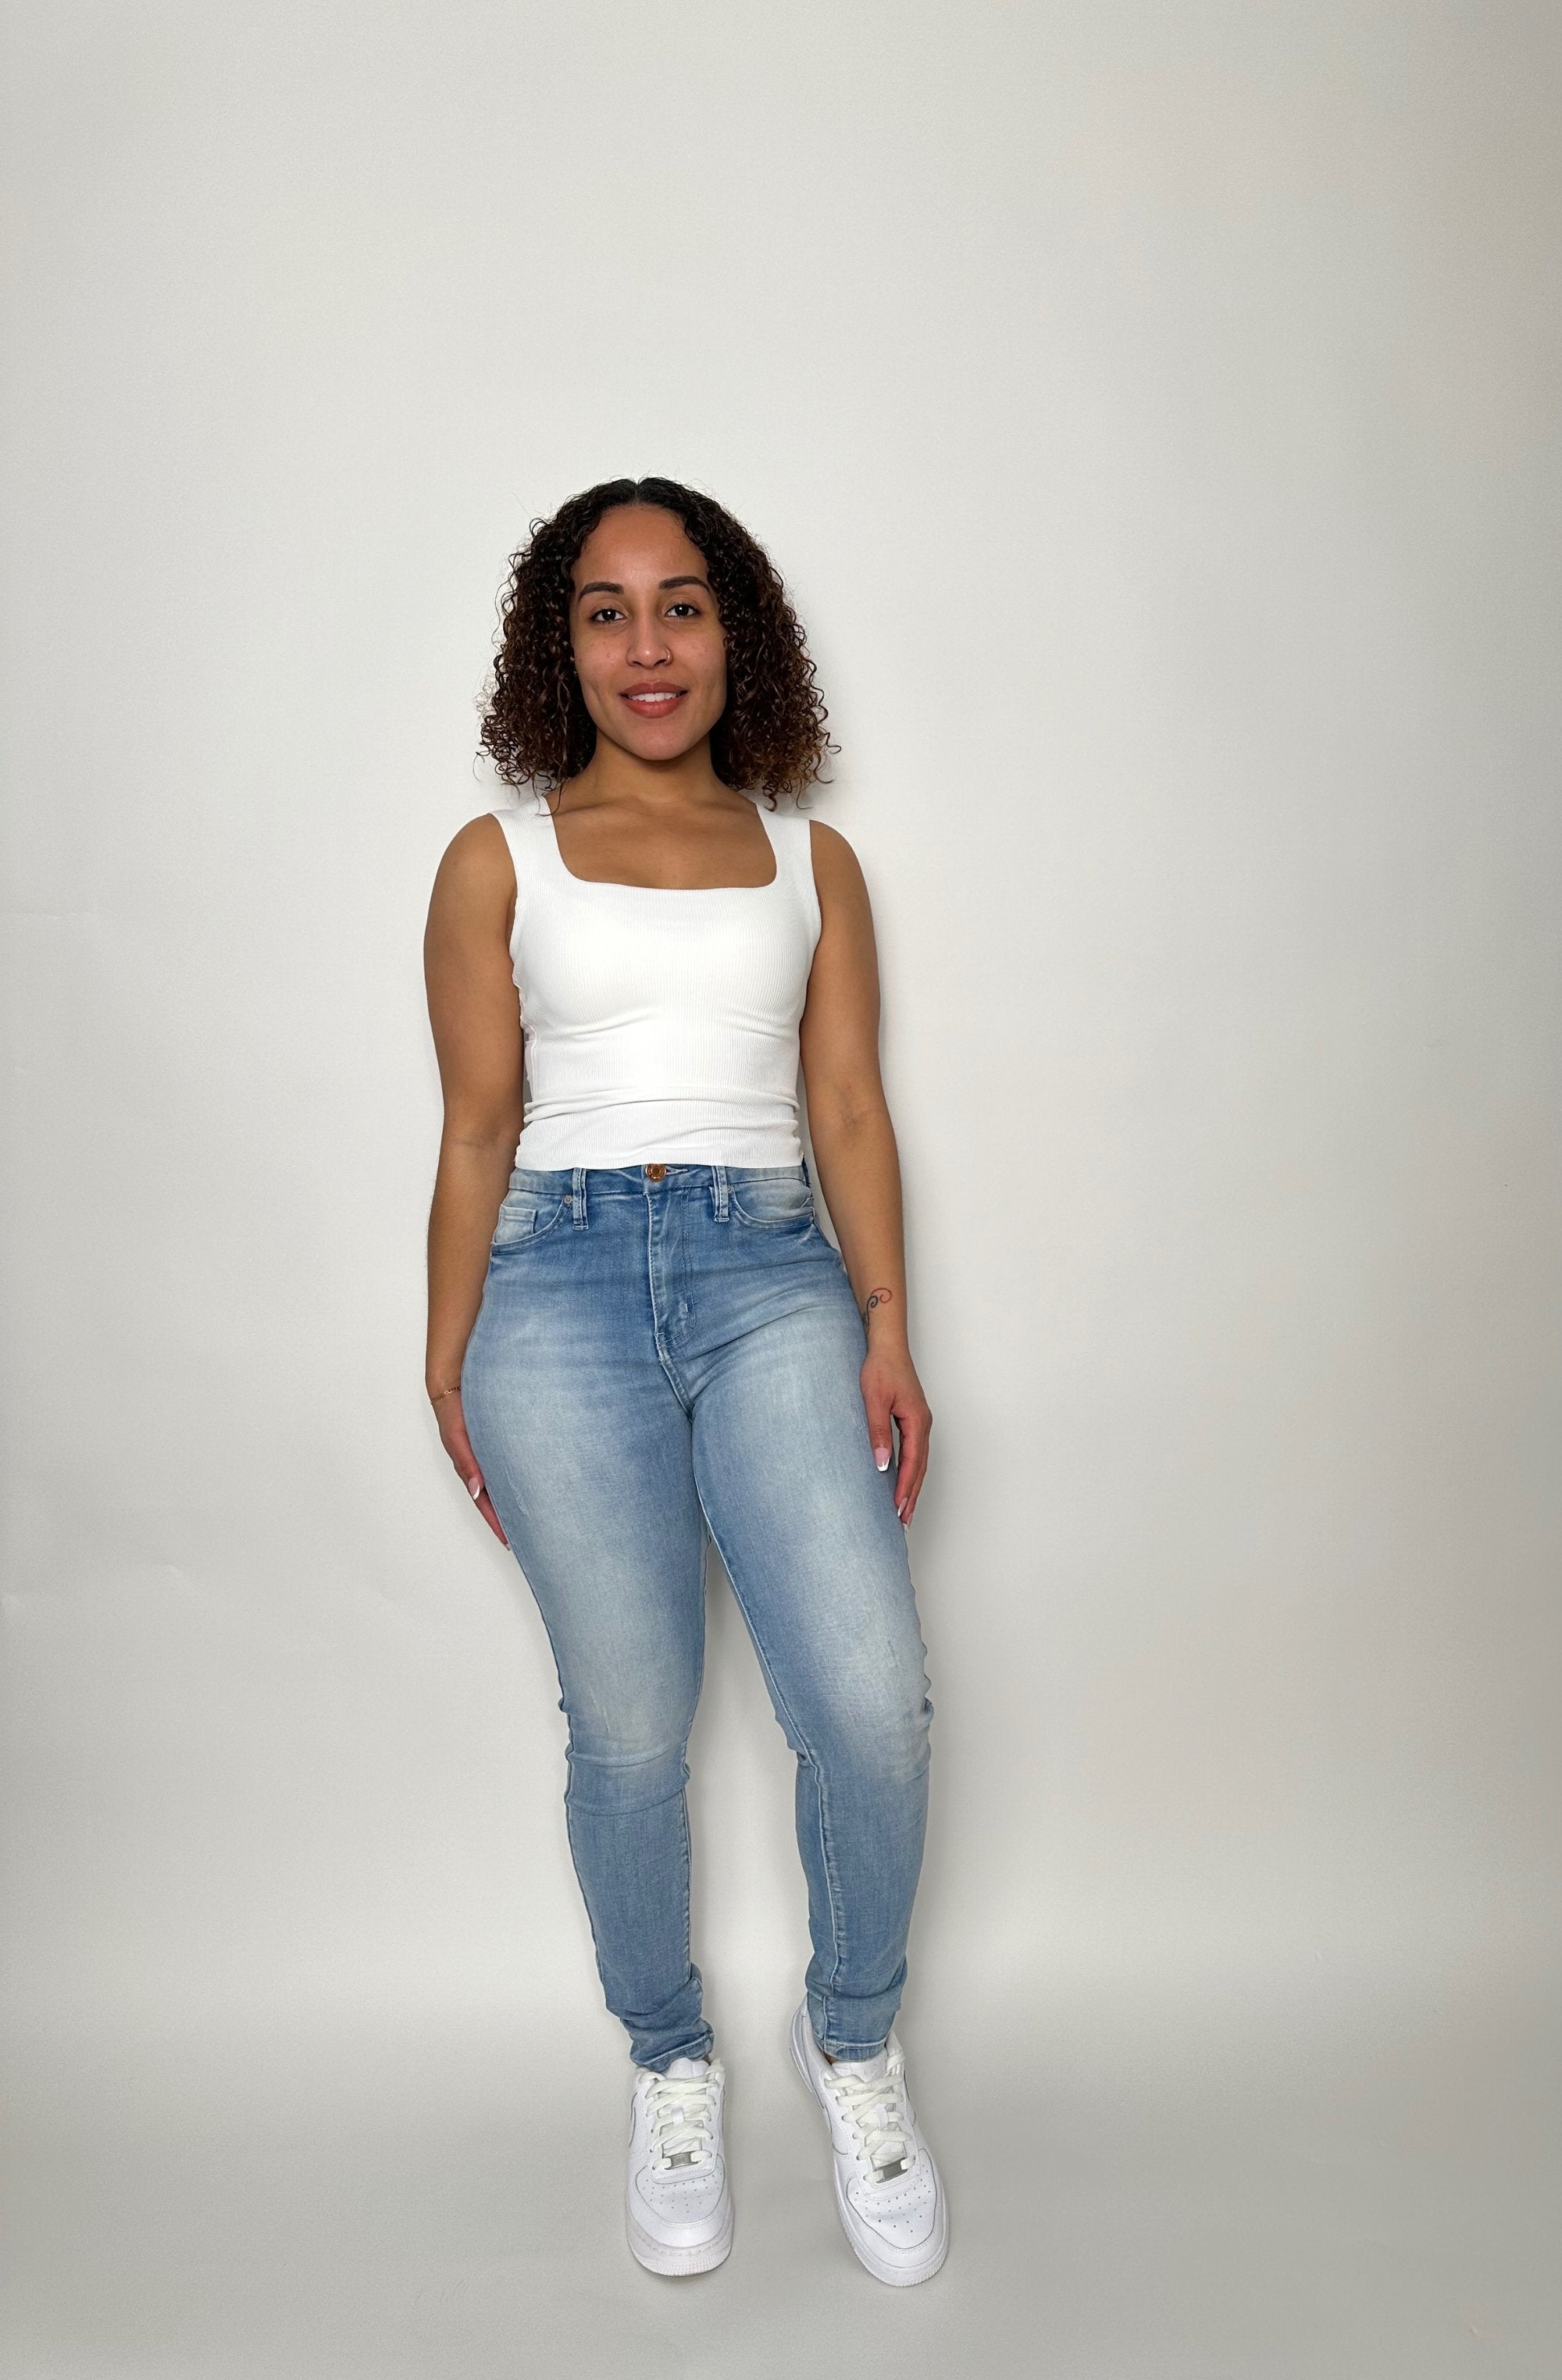 NatxCustomStyle Jeans | The Good Jean | Skinny jeans